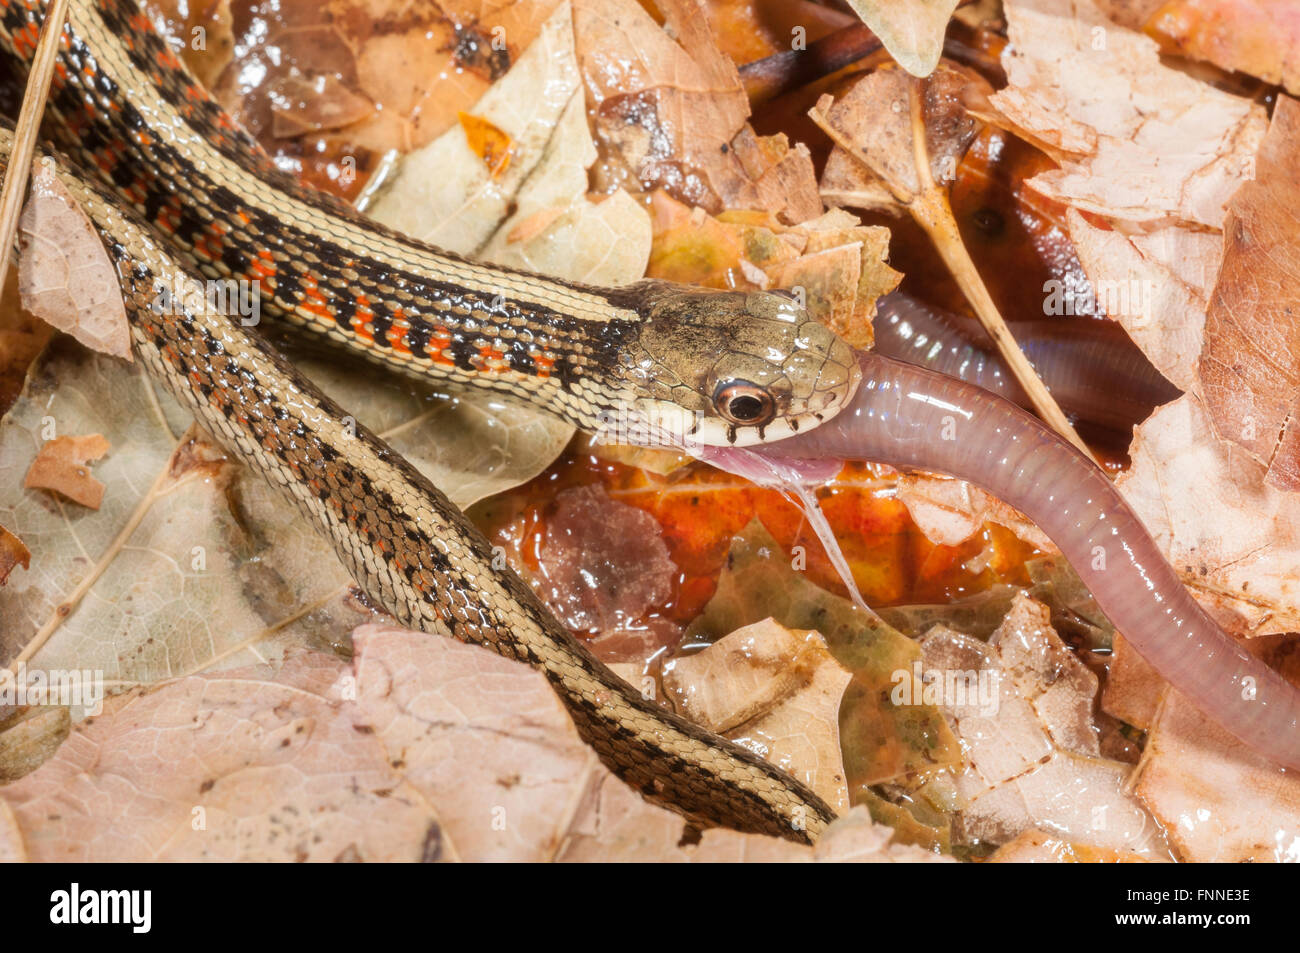 Red-sided garter snake, Thamnophis sirtalis parietalis; native to North and Central America, feeding on earthworm Stock Photo